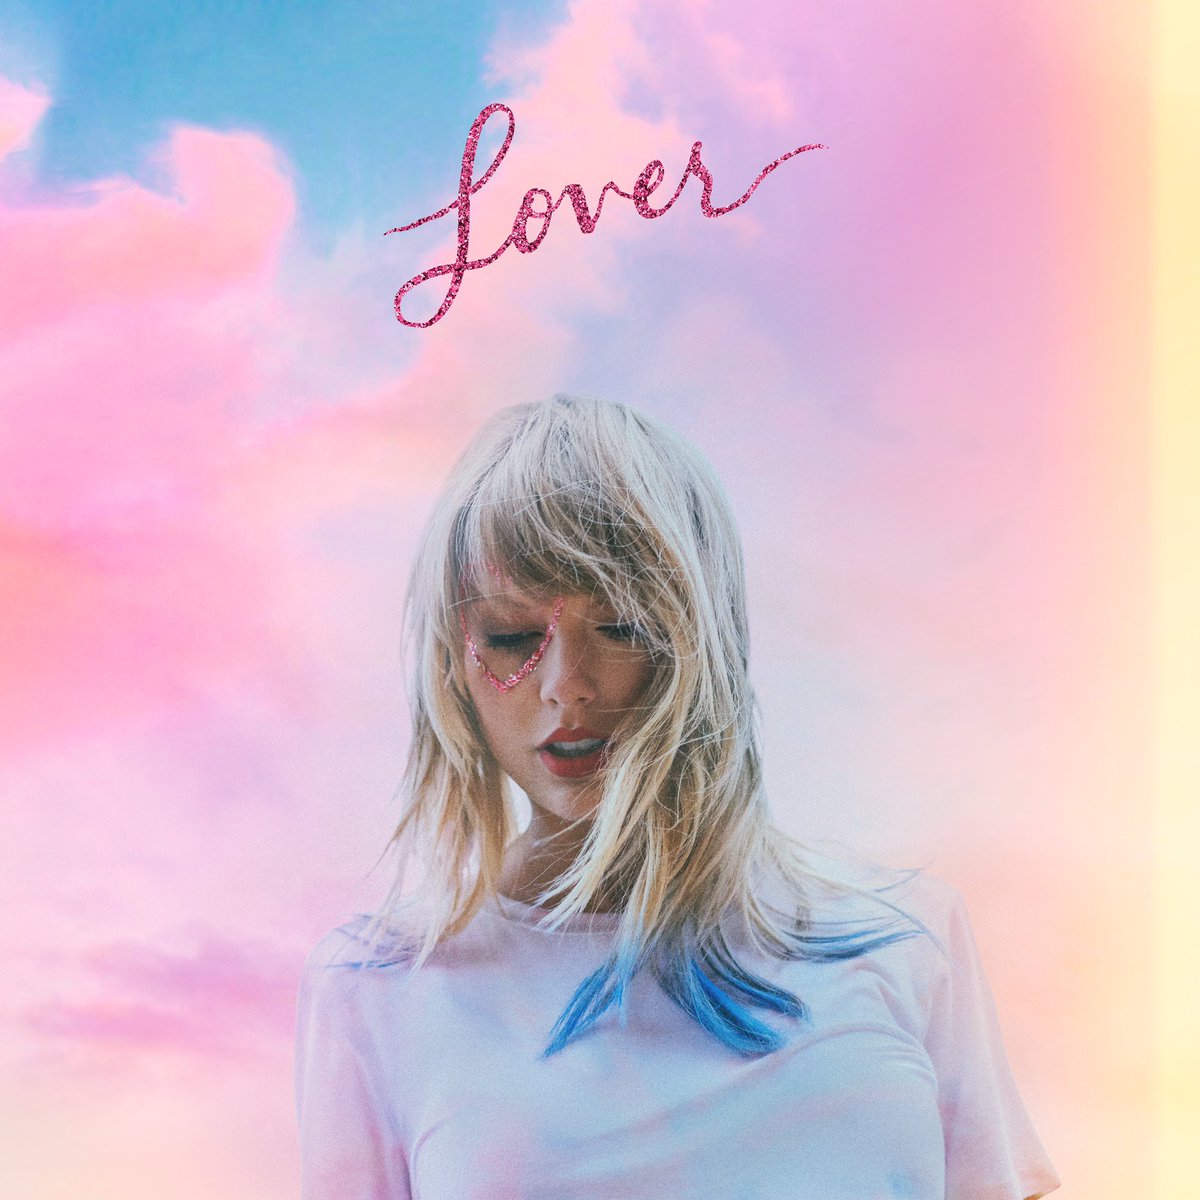 Most-streamed female albums on Spotify yesterday: 

#1. “Midnights” — 14.7M 
#2. “SOS” — 10.728M
#3. “Lover” — 10.727M